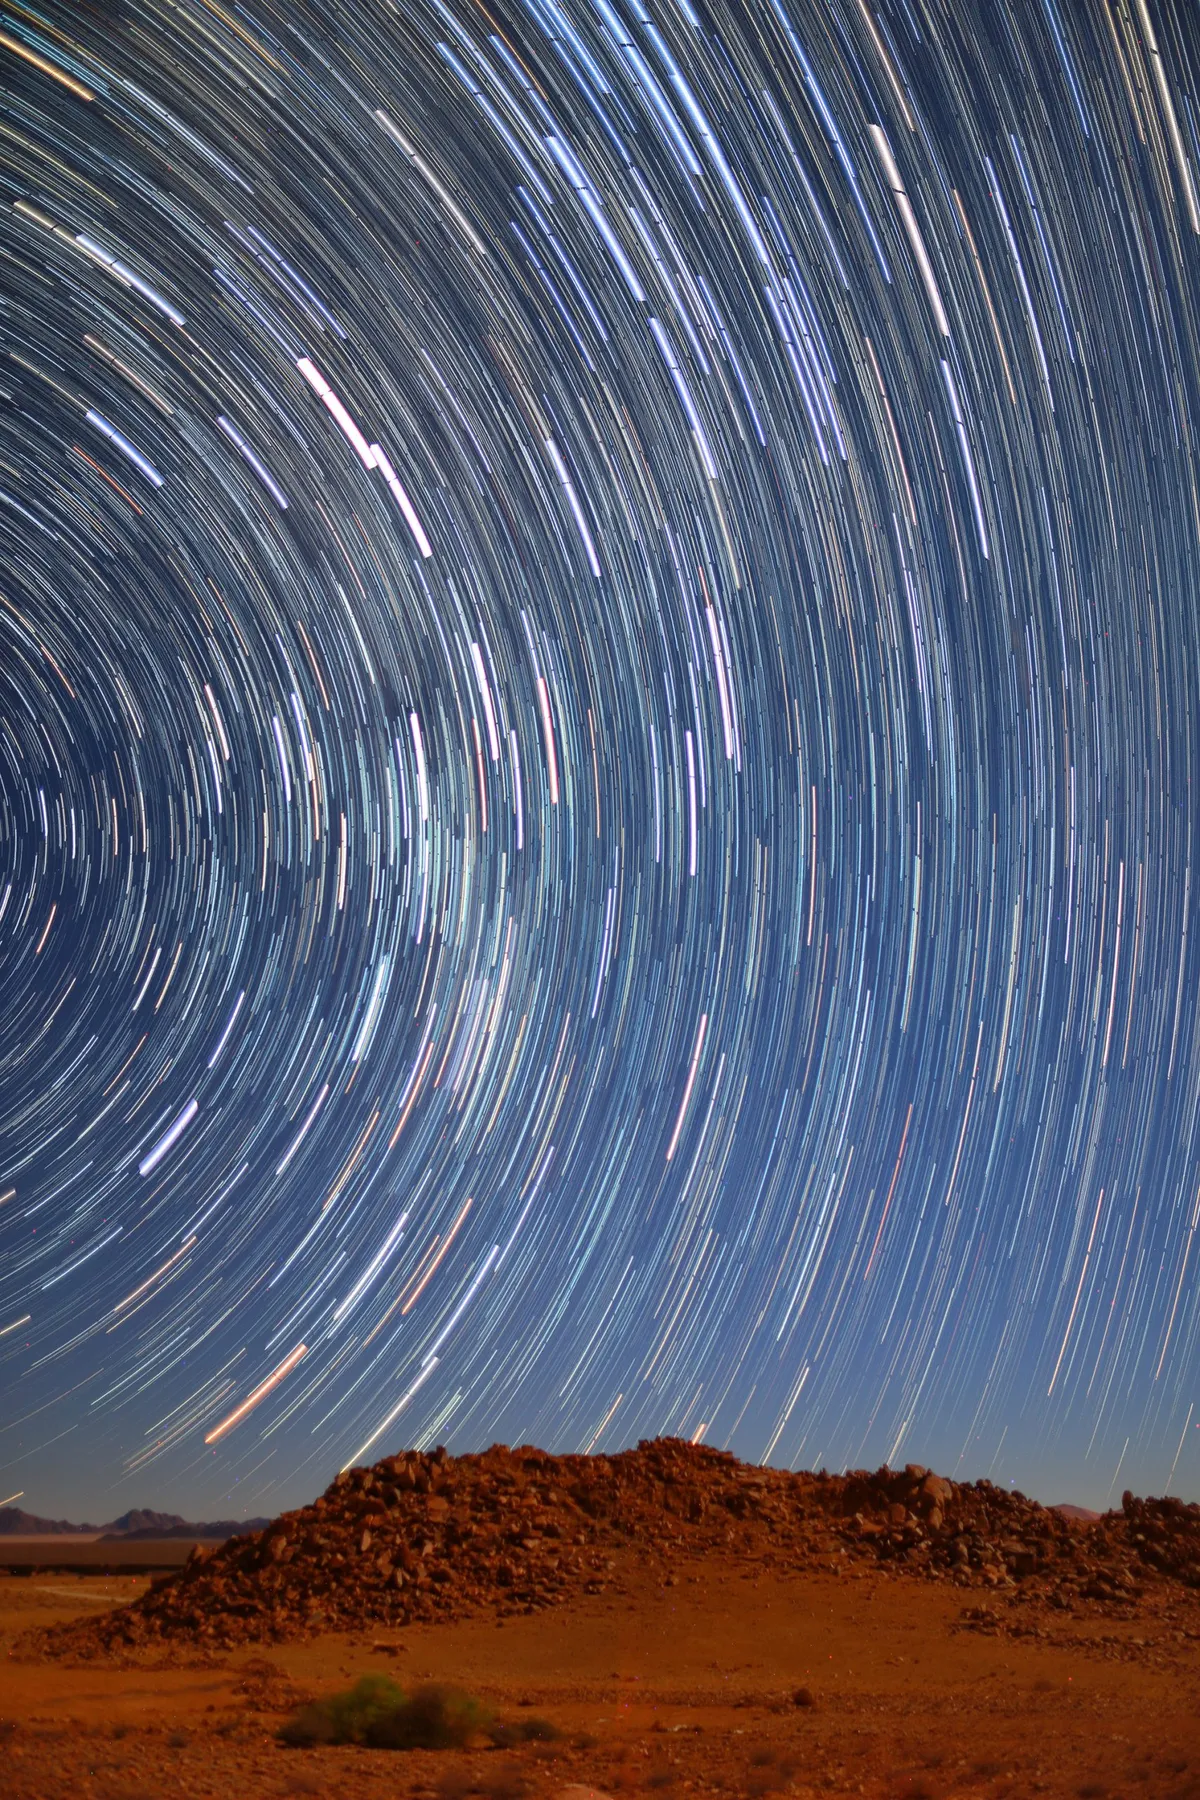 Startrails in Namib Desert Qiqige (Nina) Zhao (Australia). Category: Young Astronomy Photographer of the Year. Equipment:Canon EOS 6D camera, 24 mm f/1.6 lens, ISO 500, 20-second exposure.